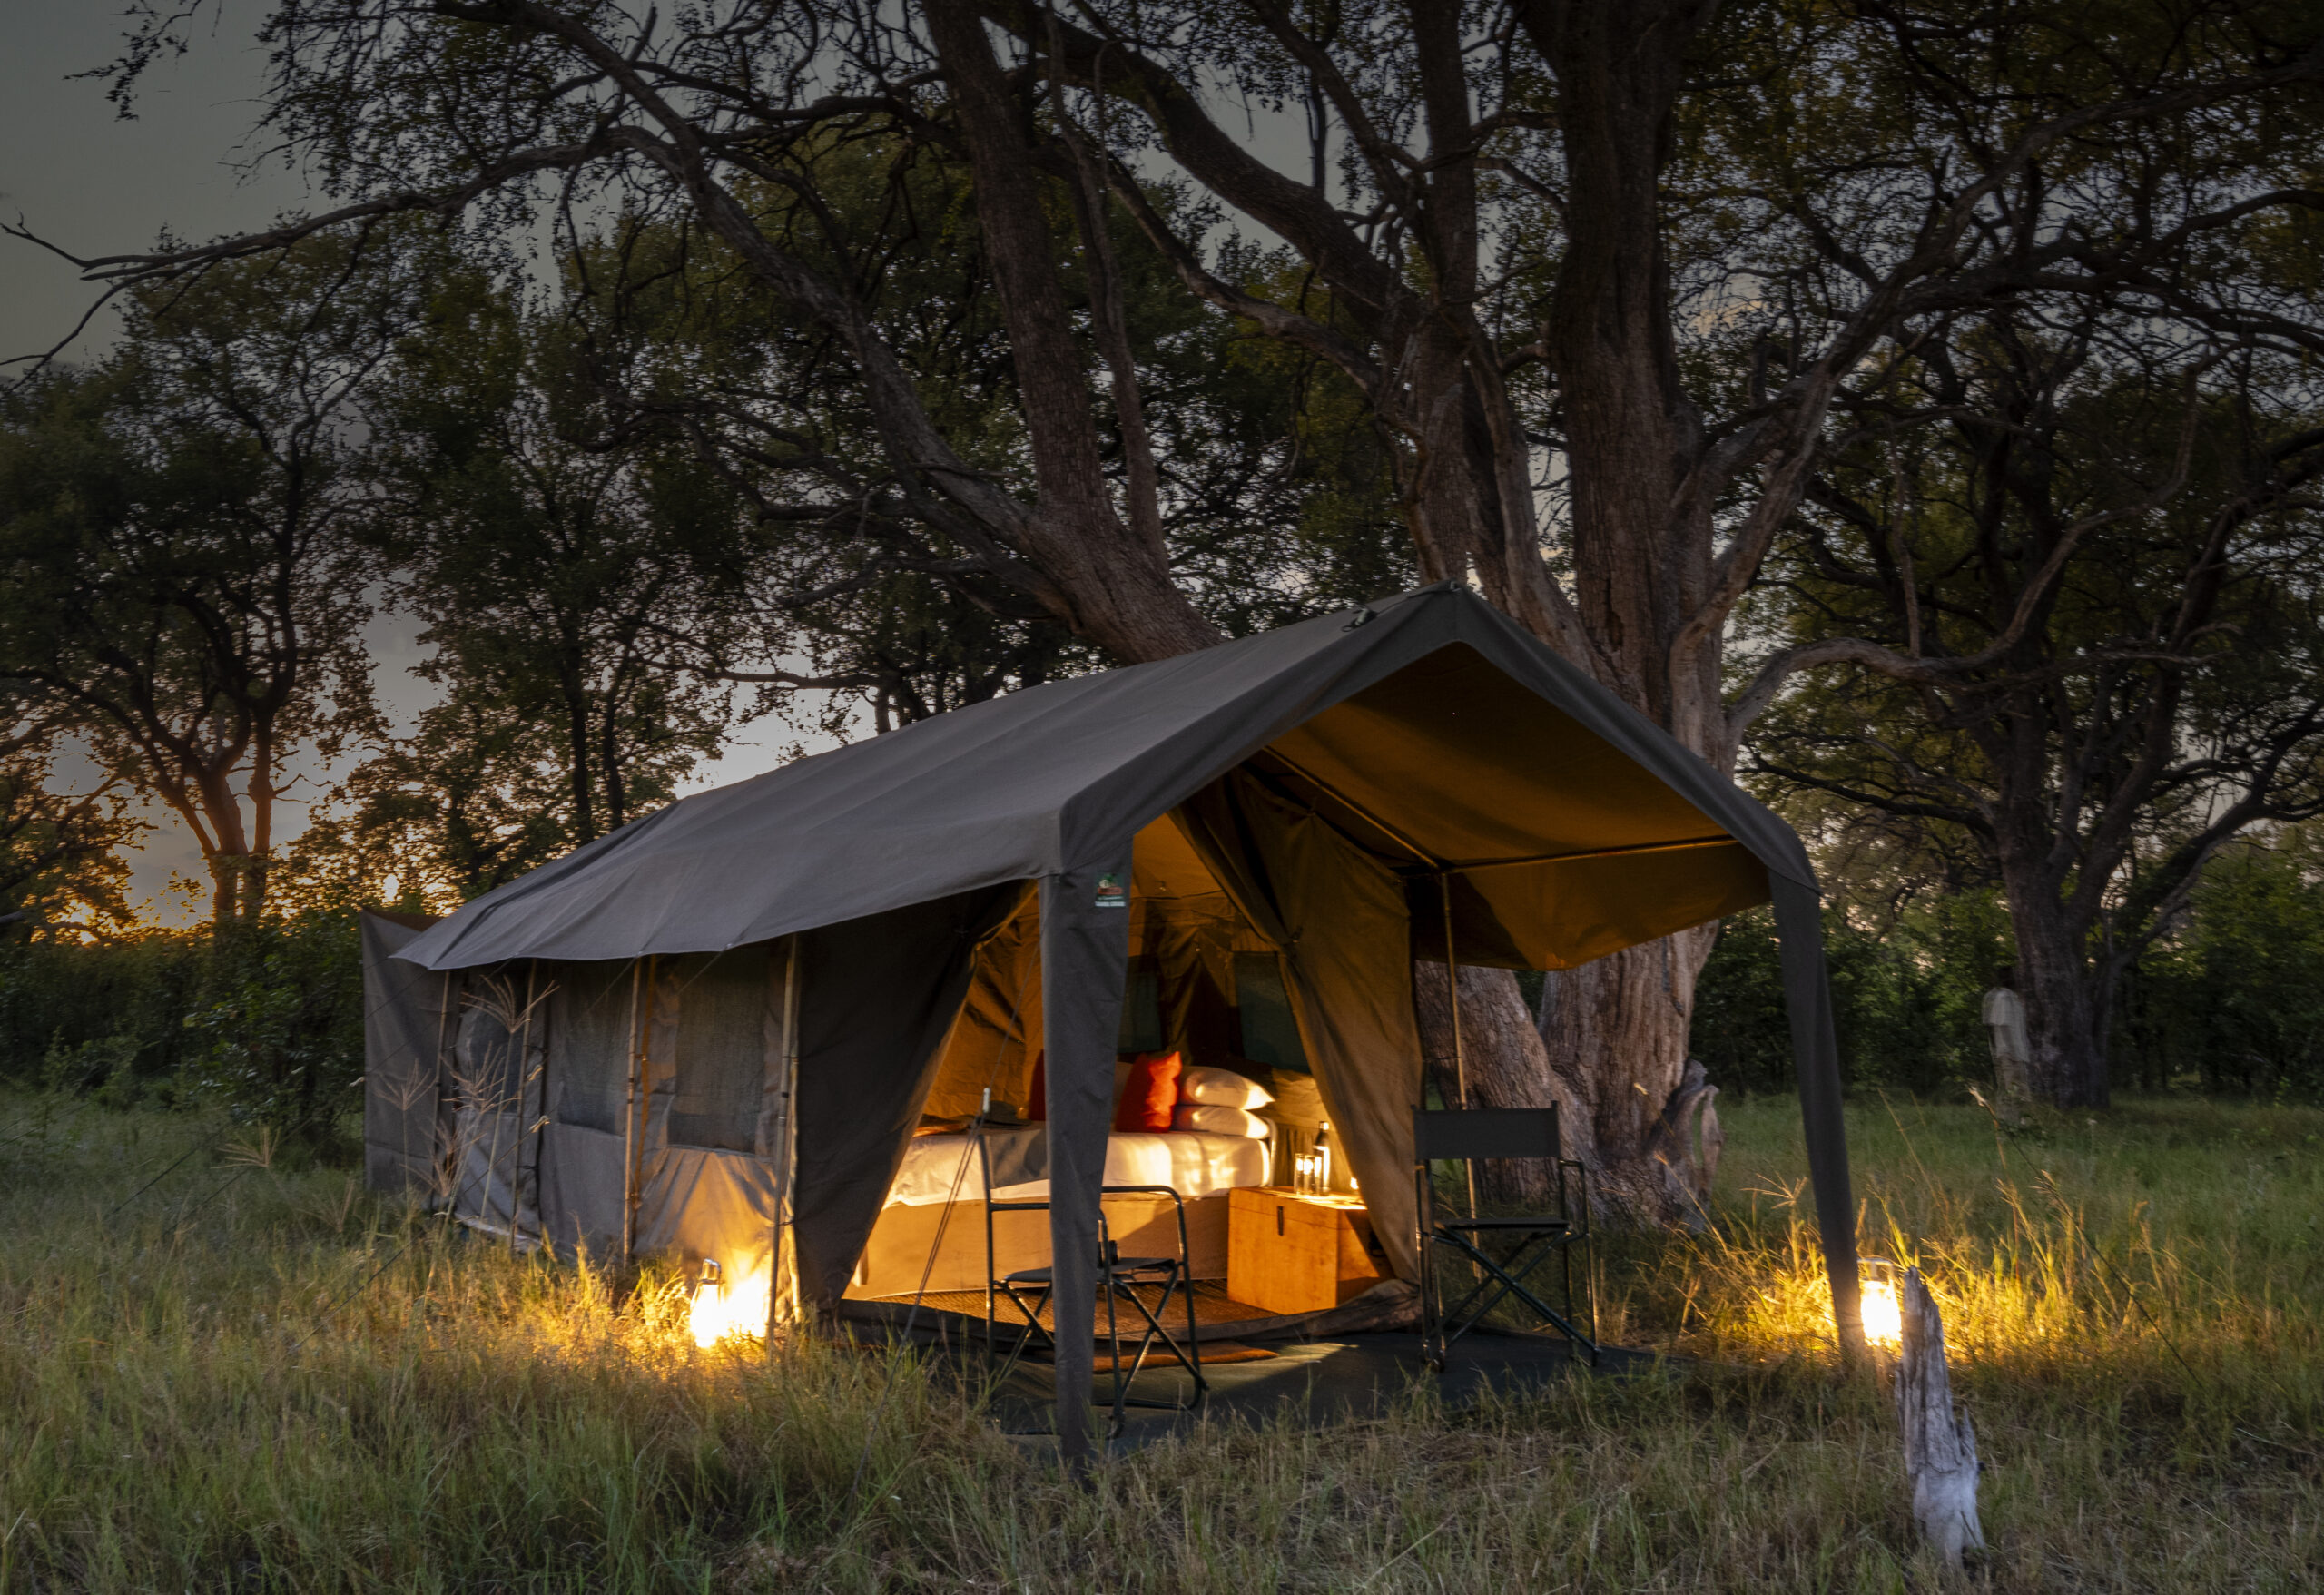 Brave Africa guest tent at night